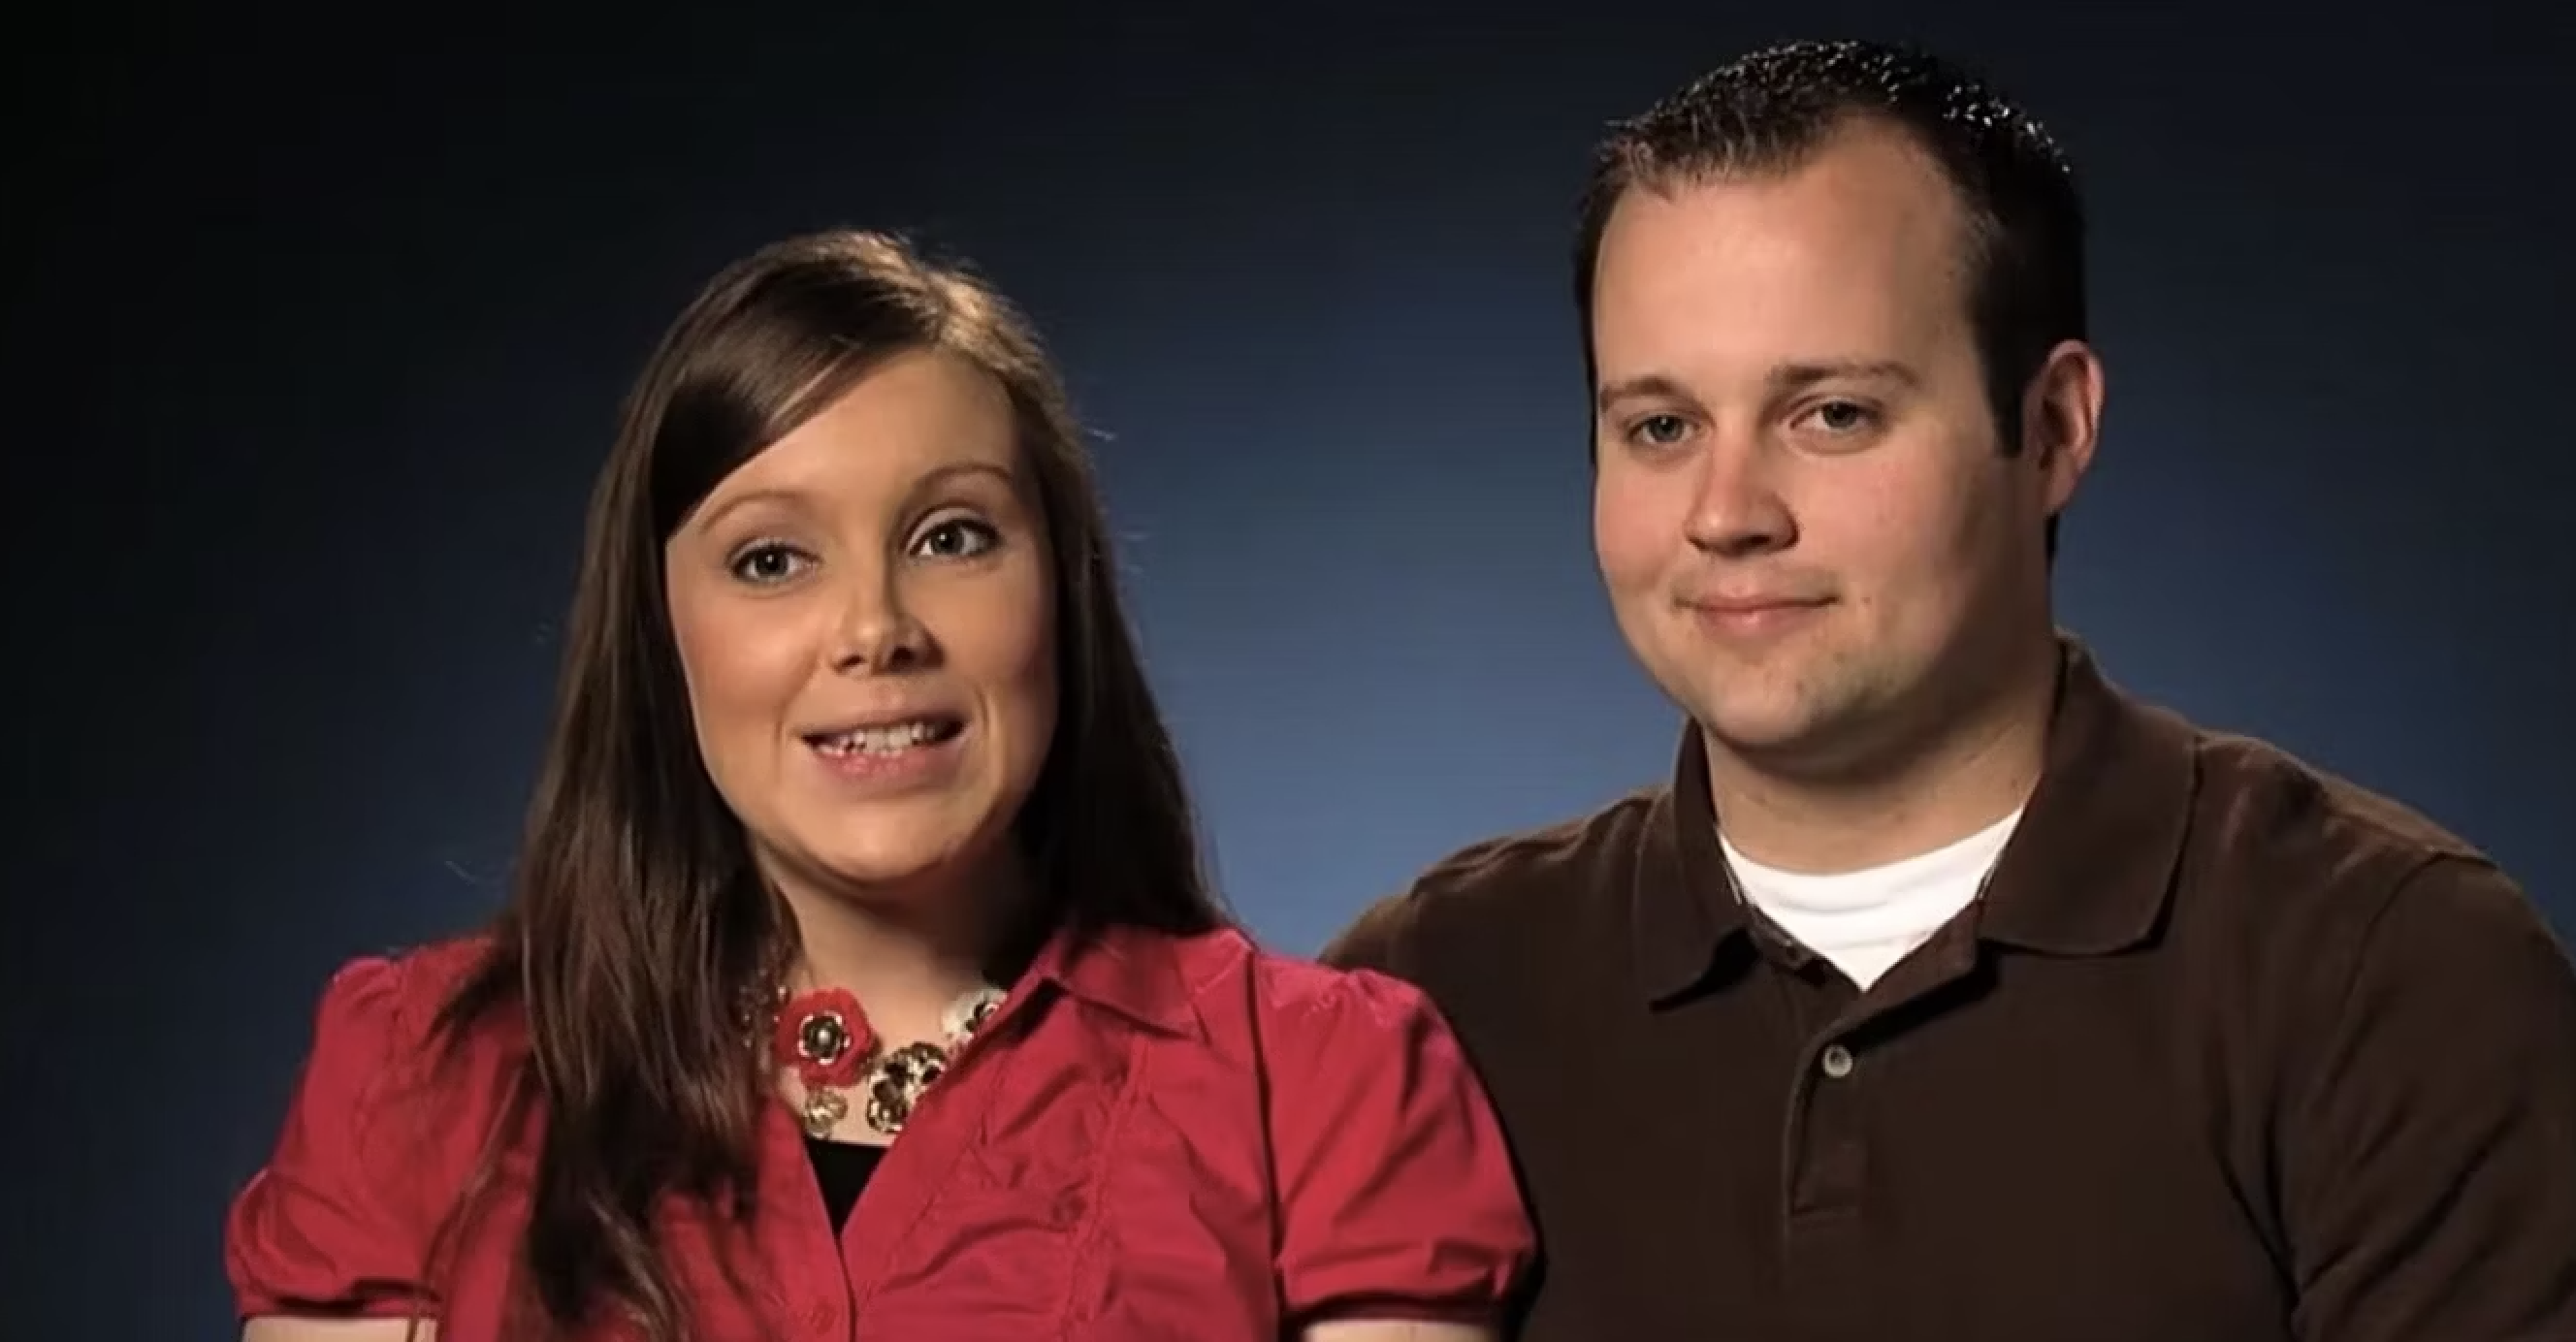 Josh and Anna Duggar on the now-defunct TLC reality show 19 Kids and Counting.